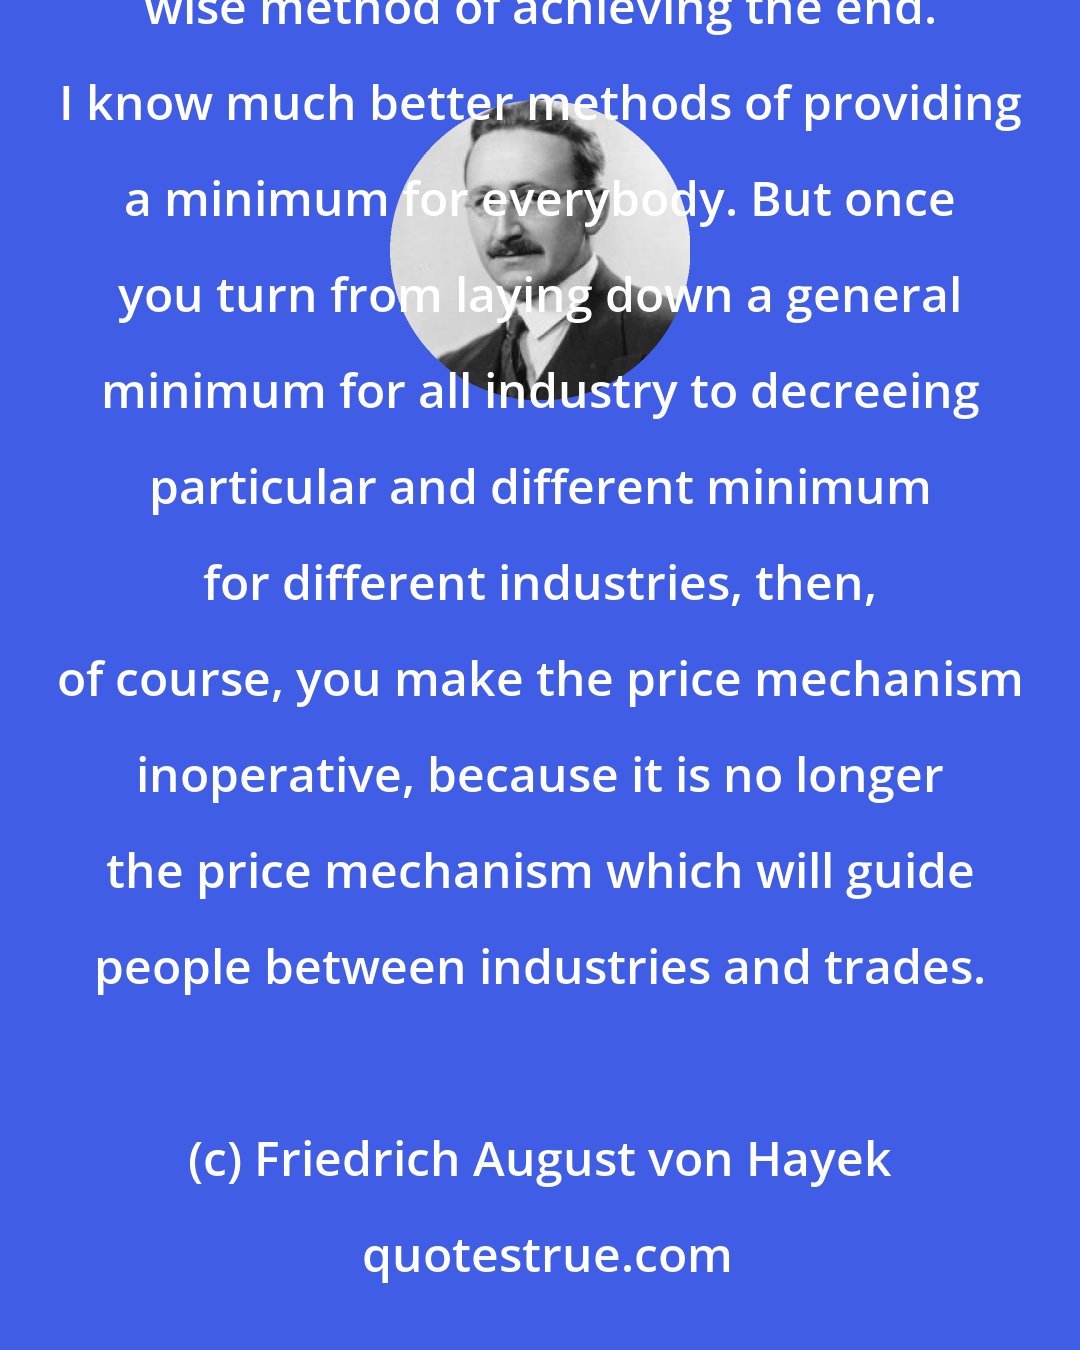 Friedrich August von Hayek: A general flat minimum-wage law for all industry is permissible, but I do not think that it is a particularly wise method of achieving the end. I know much better methods of providing a minimum for everybody. But once you turn from laying down a general minimum for all industry to decreeing particular and different minimum for different industries, then, of course, you make the price mechanism inoperative, because it is no longer the price mechanism which will guide people between industries and trades.